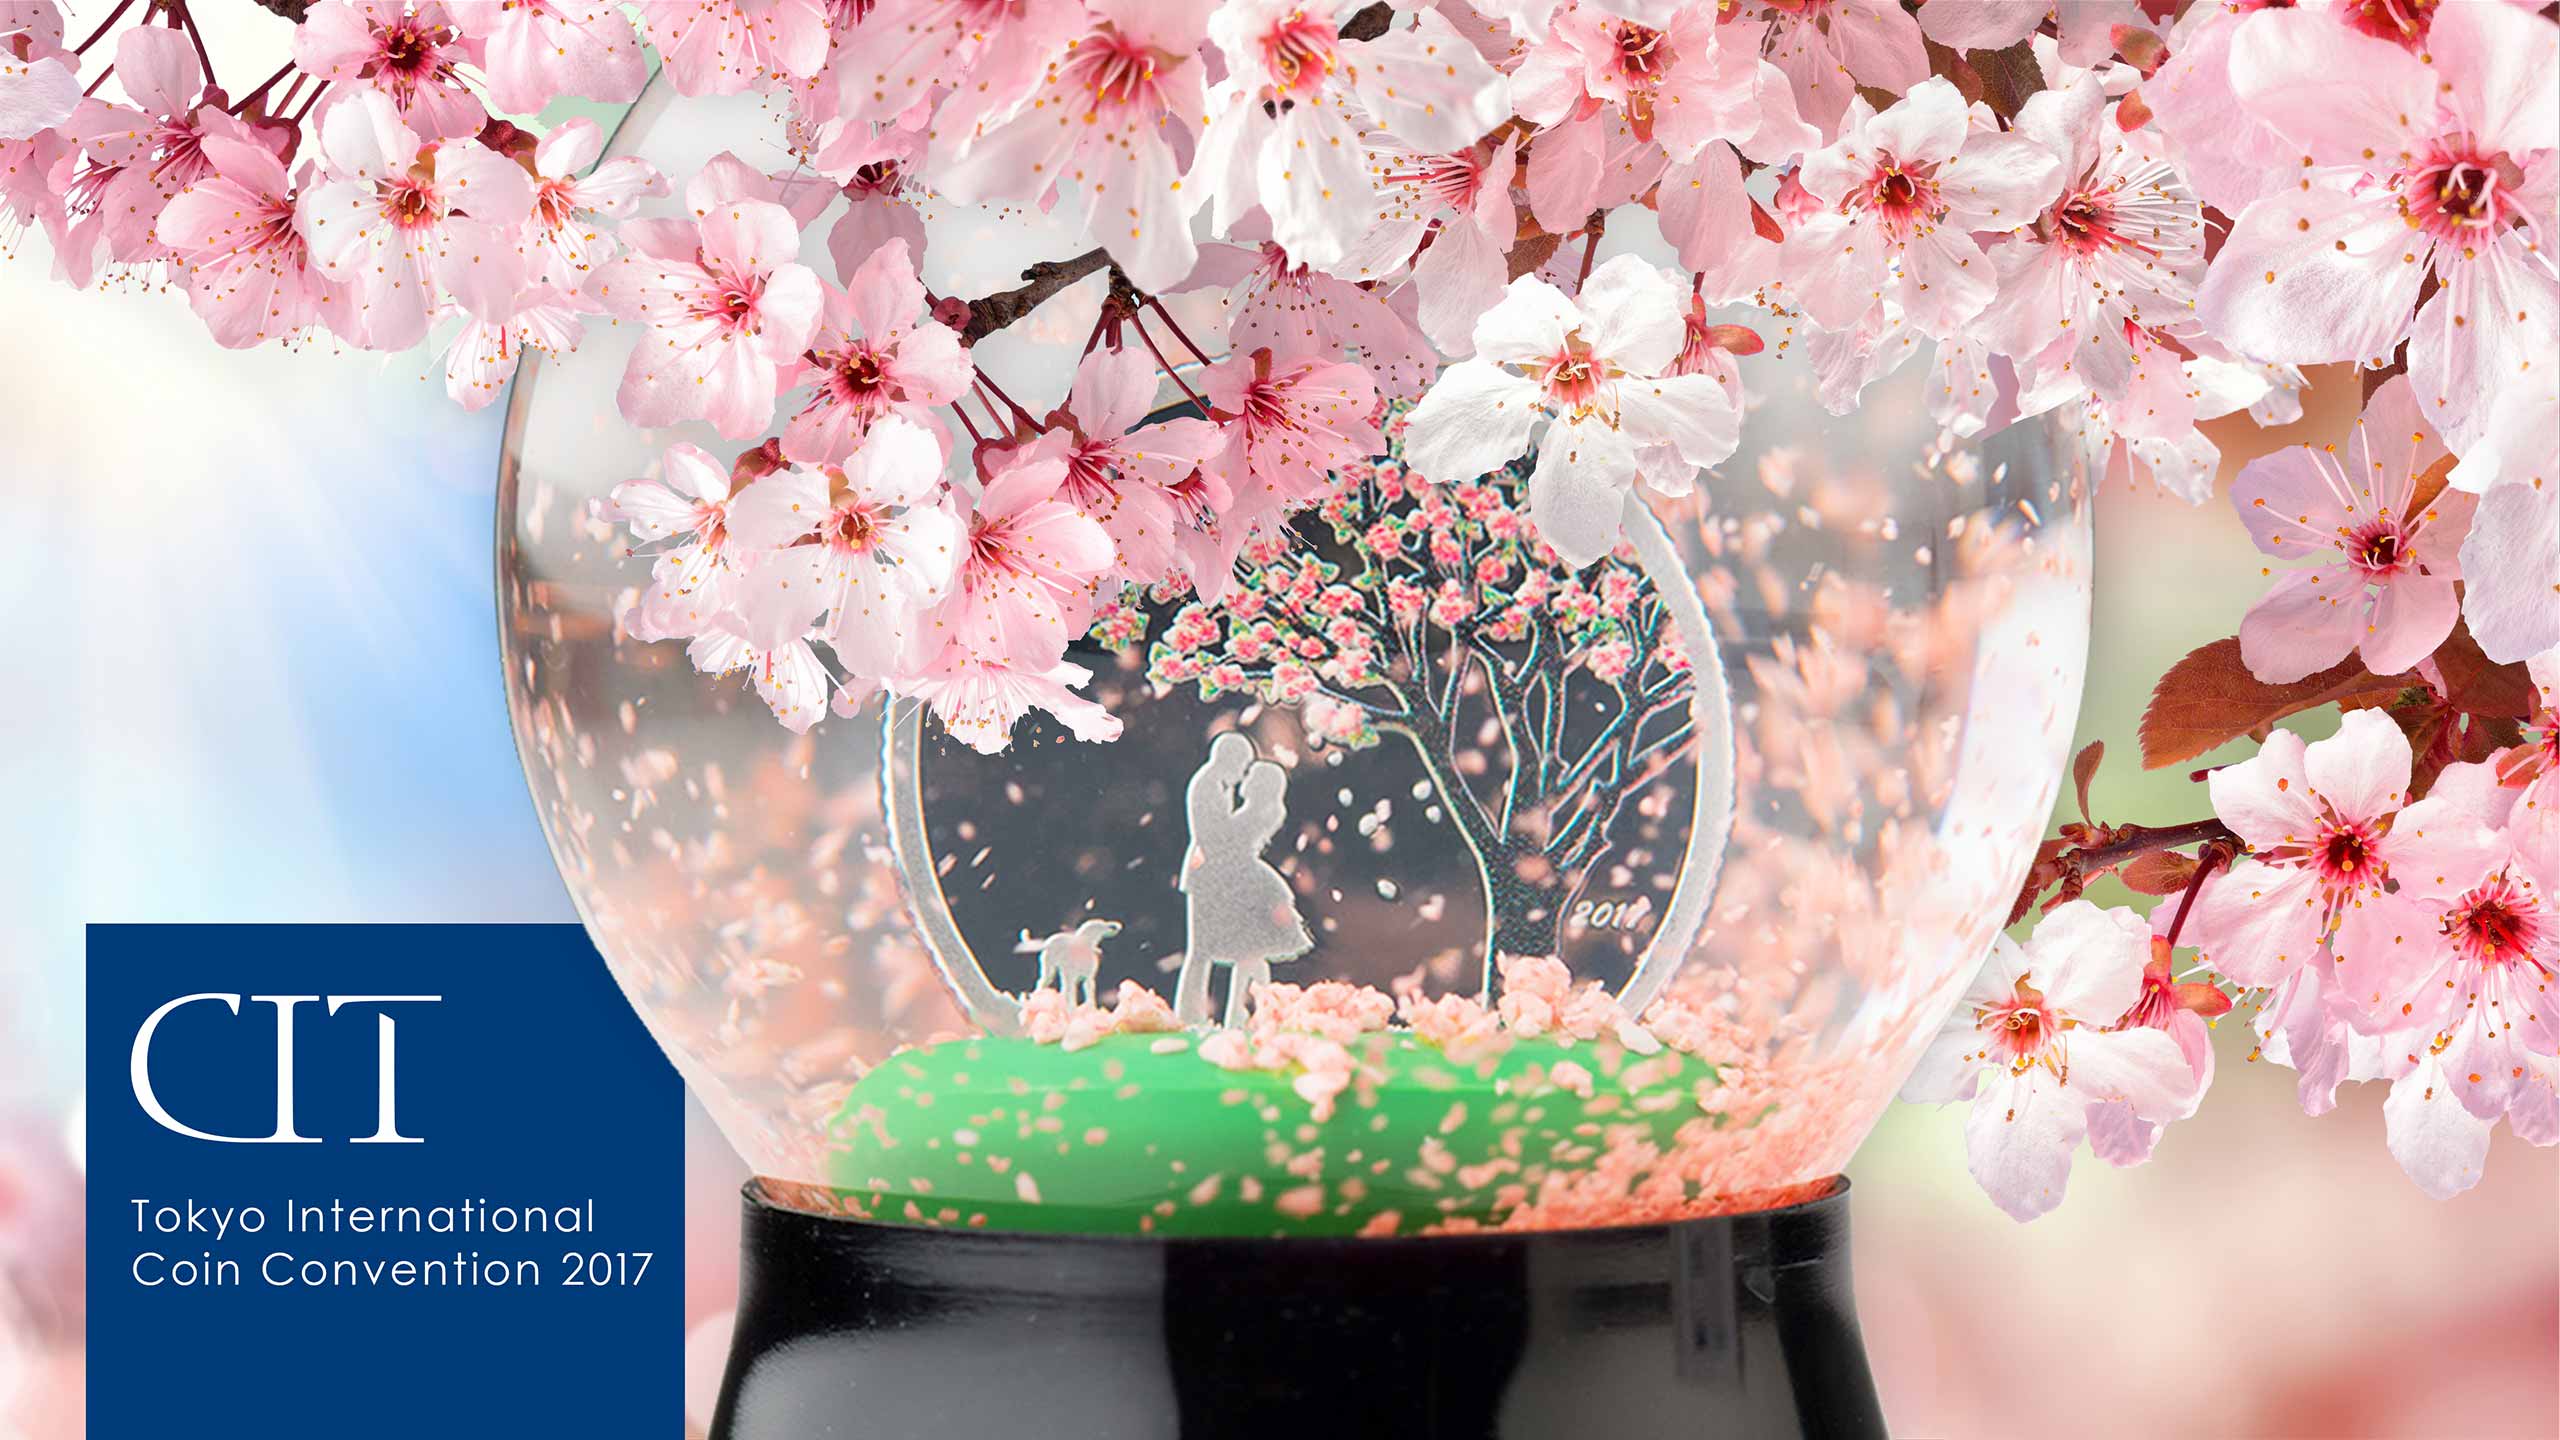 coin invest trust, cit, at toyko international coin convention with cherry blossom globe coin